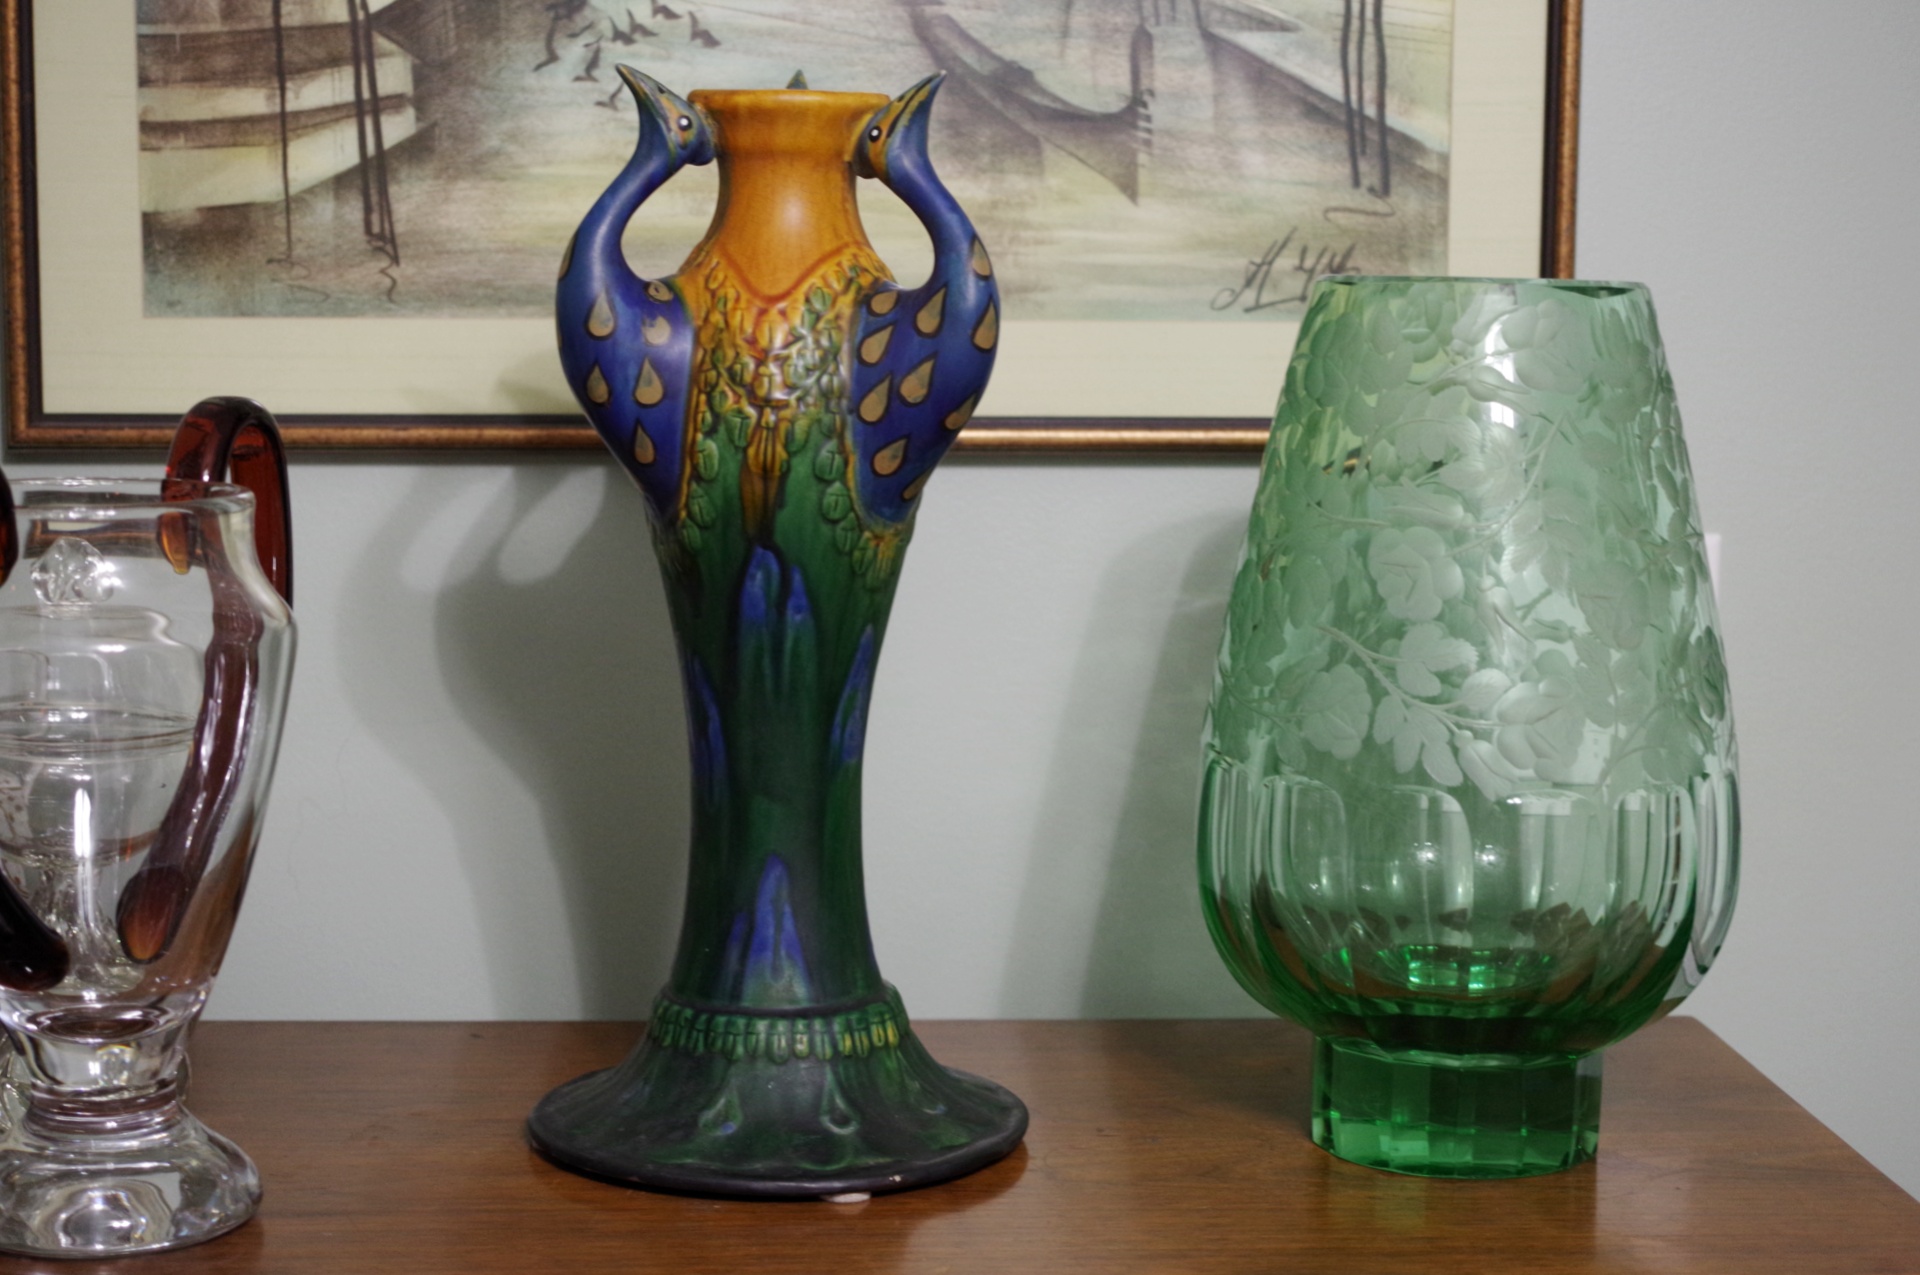 Peacock Pottery Vase - Where/When/Who/Why? | Antiques Board